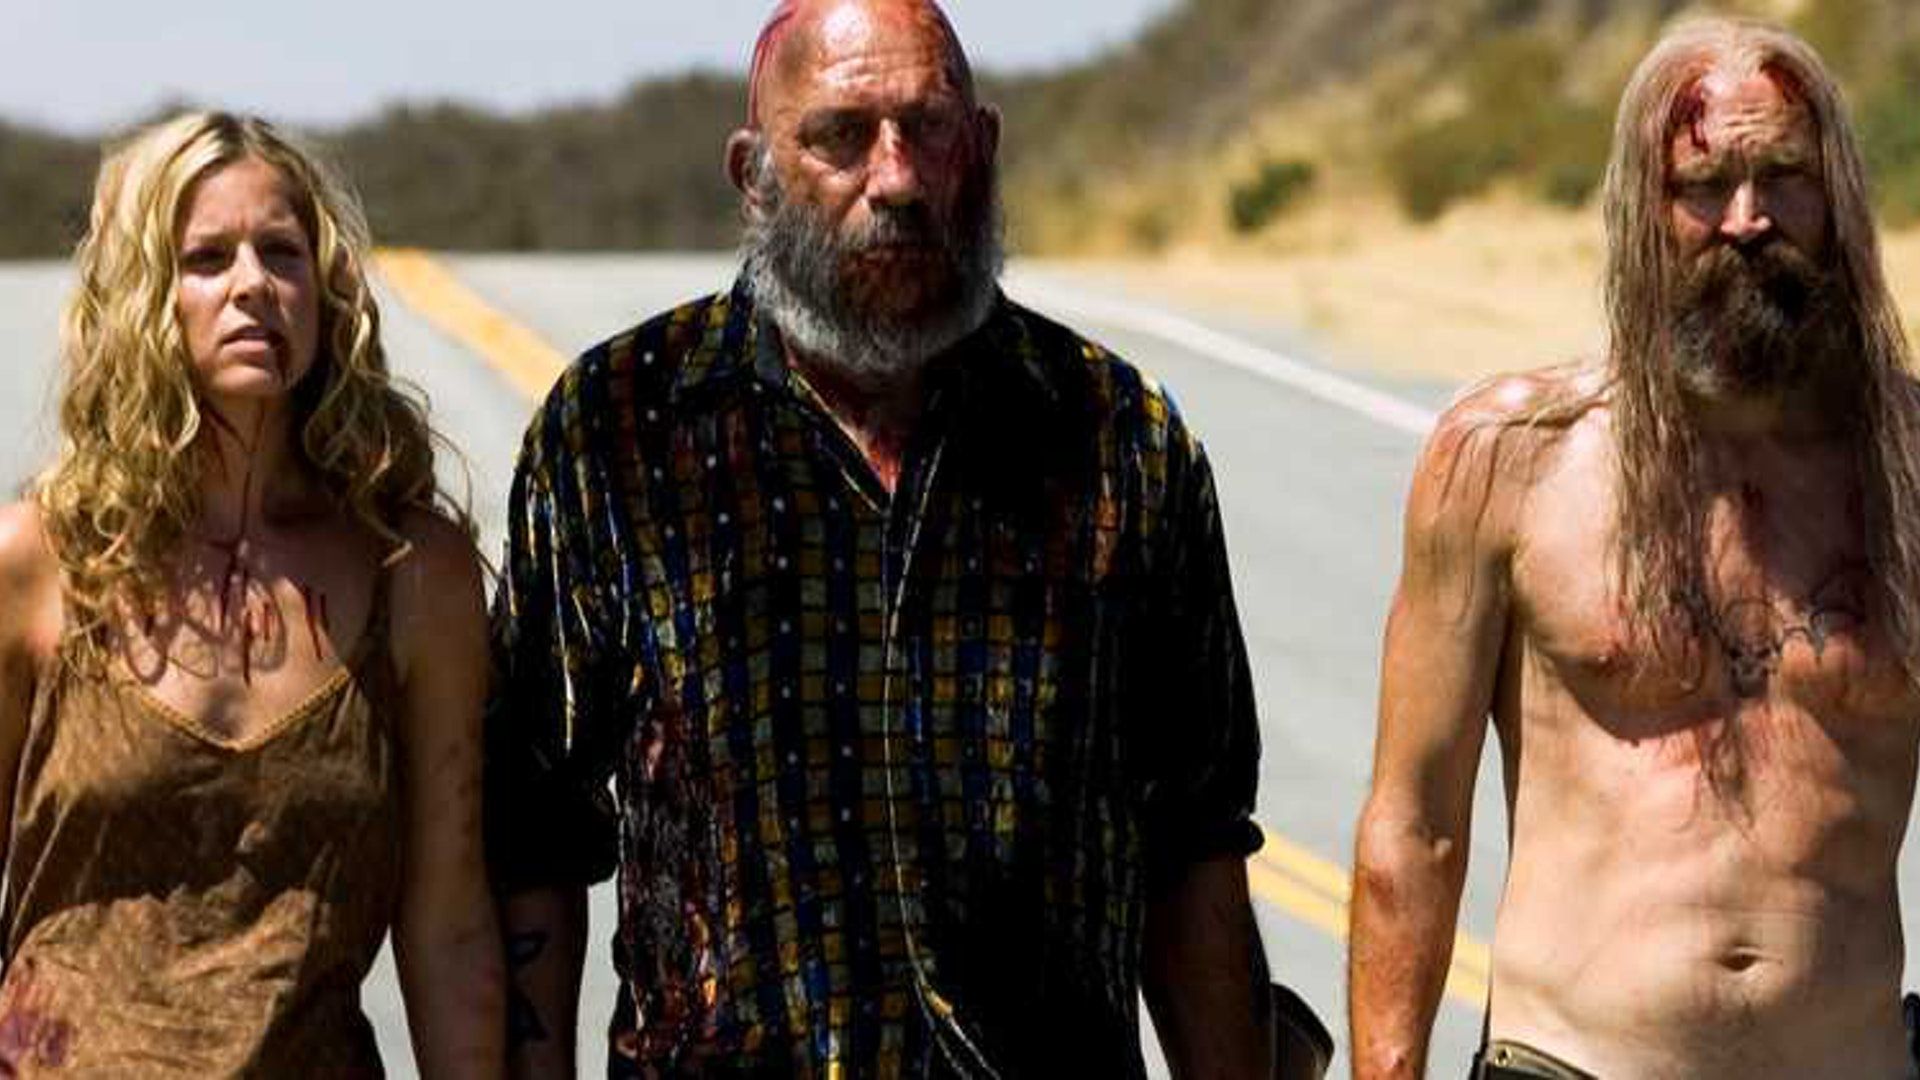 The Devil's Rejects. Alamo Drafthouse Cinema